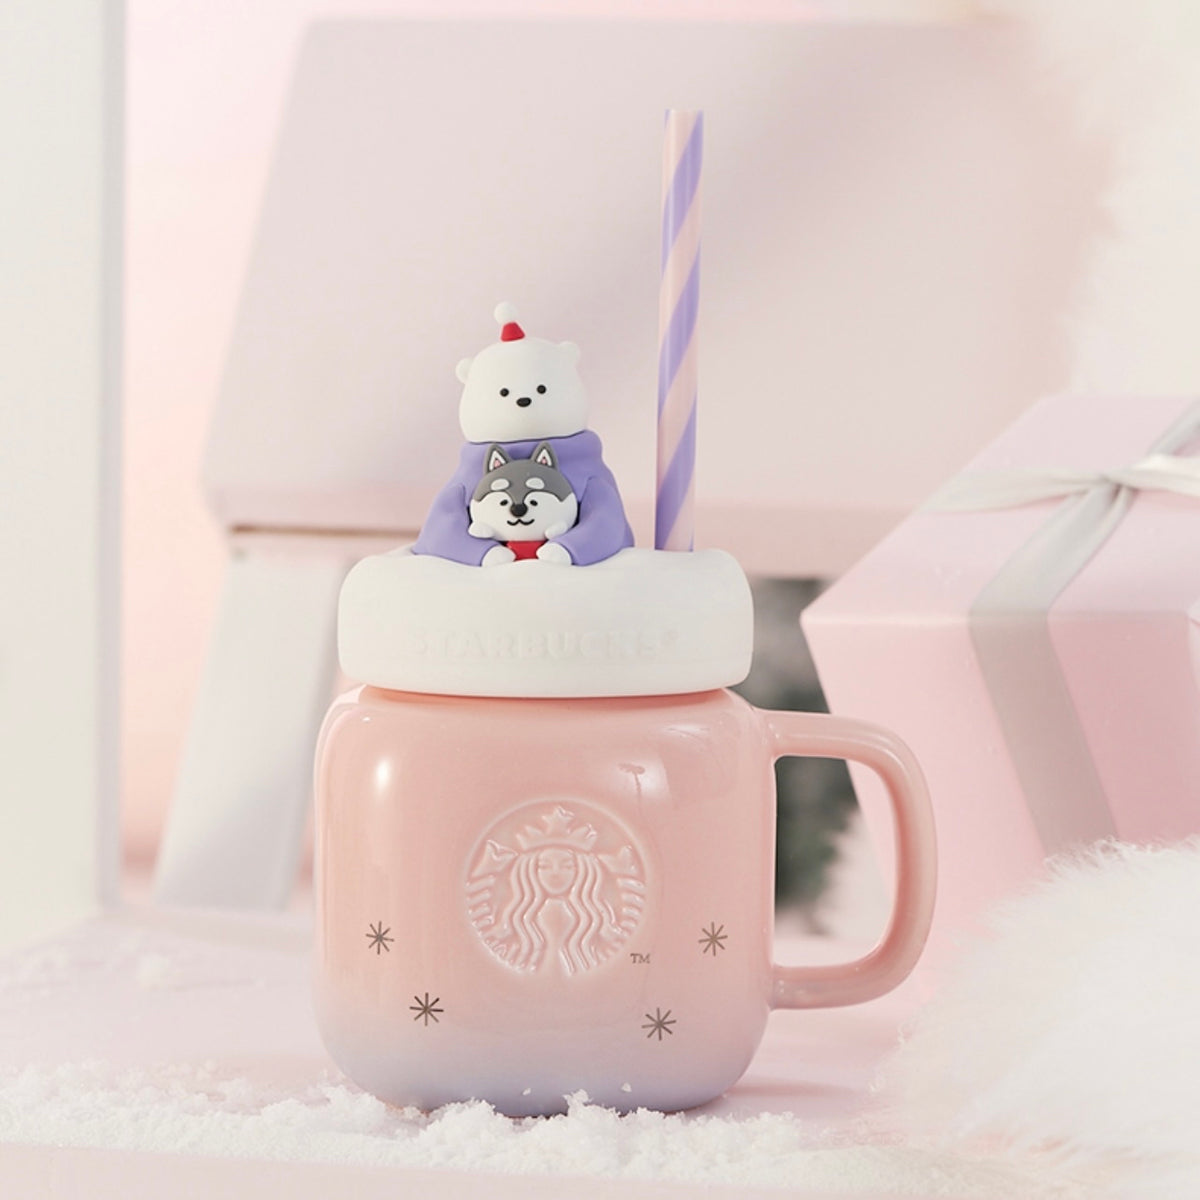 Starbucks and Disney Parks Team Up For Holiday Collection – World